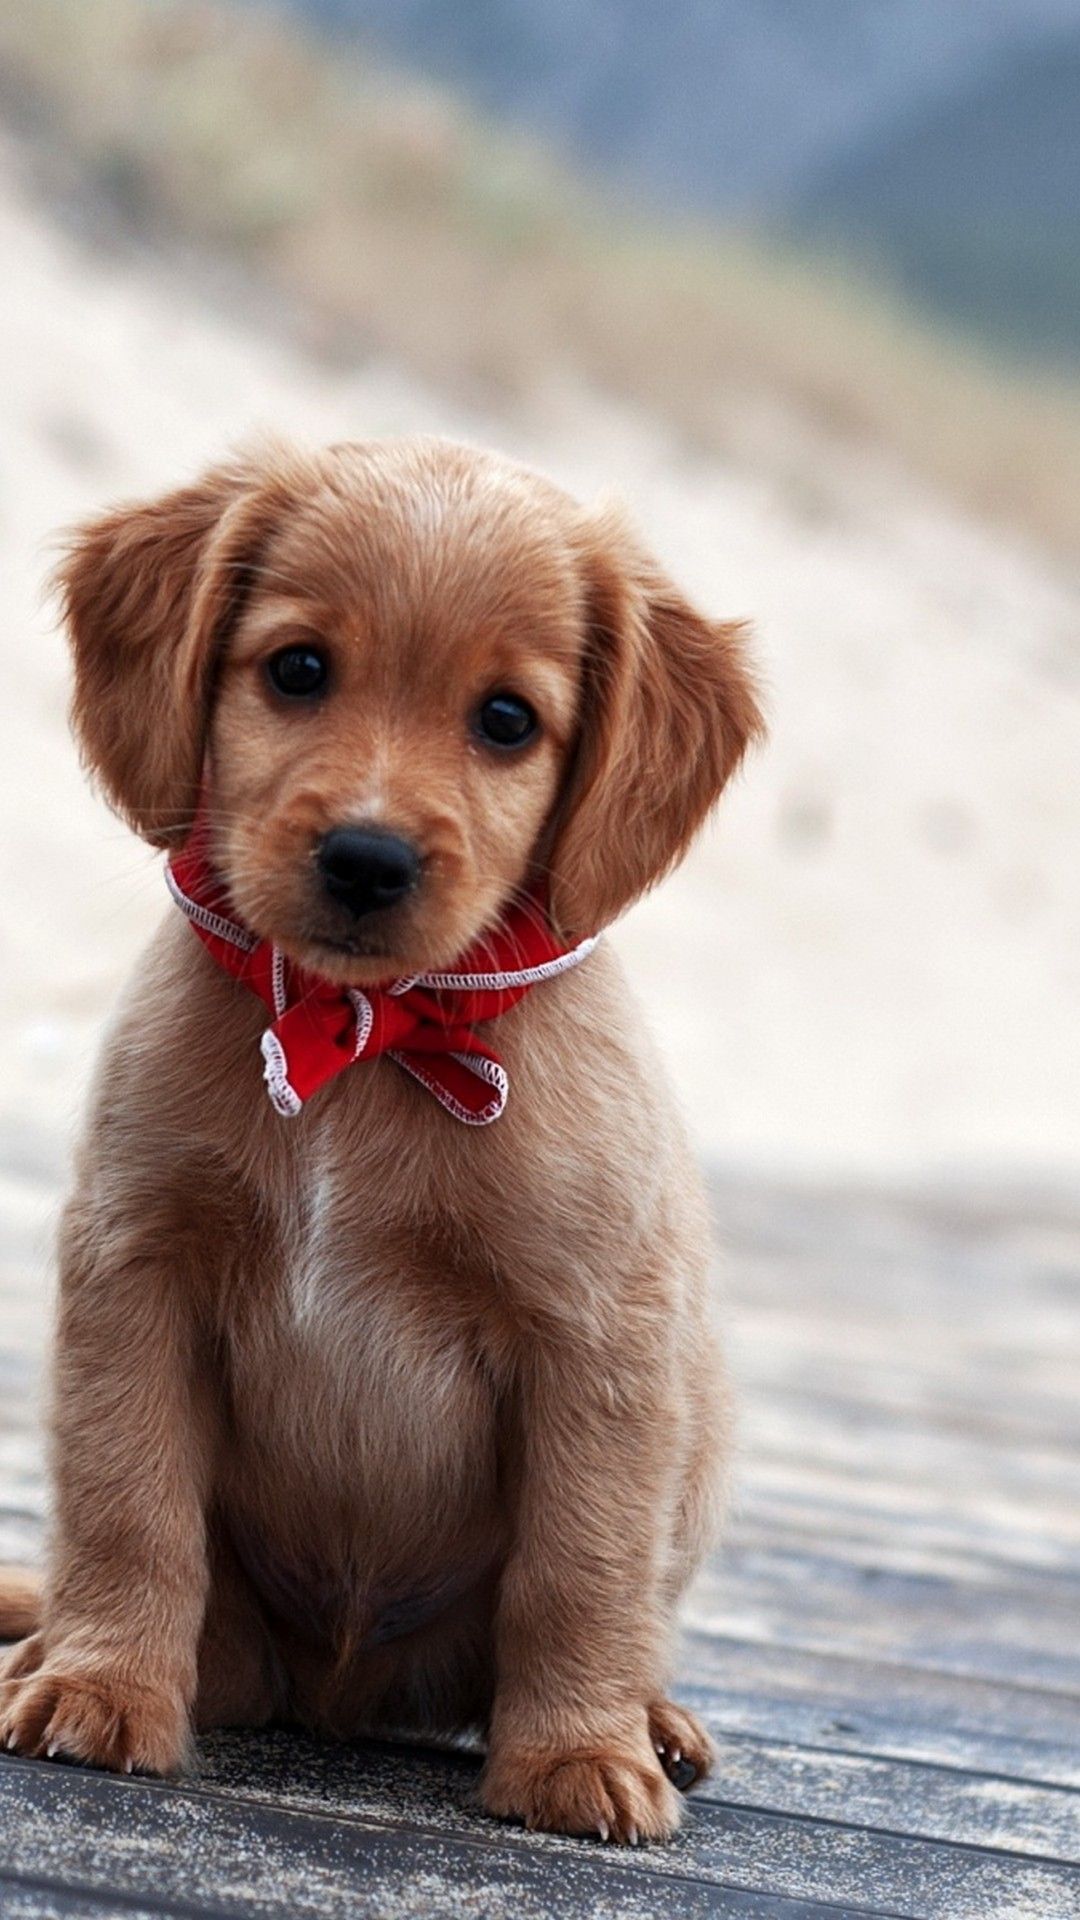 Pics Of Puppies Wallpaper Android Android Wallpaper